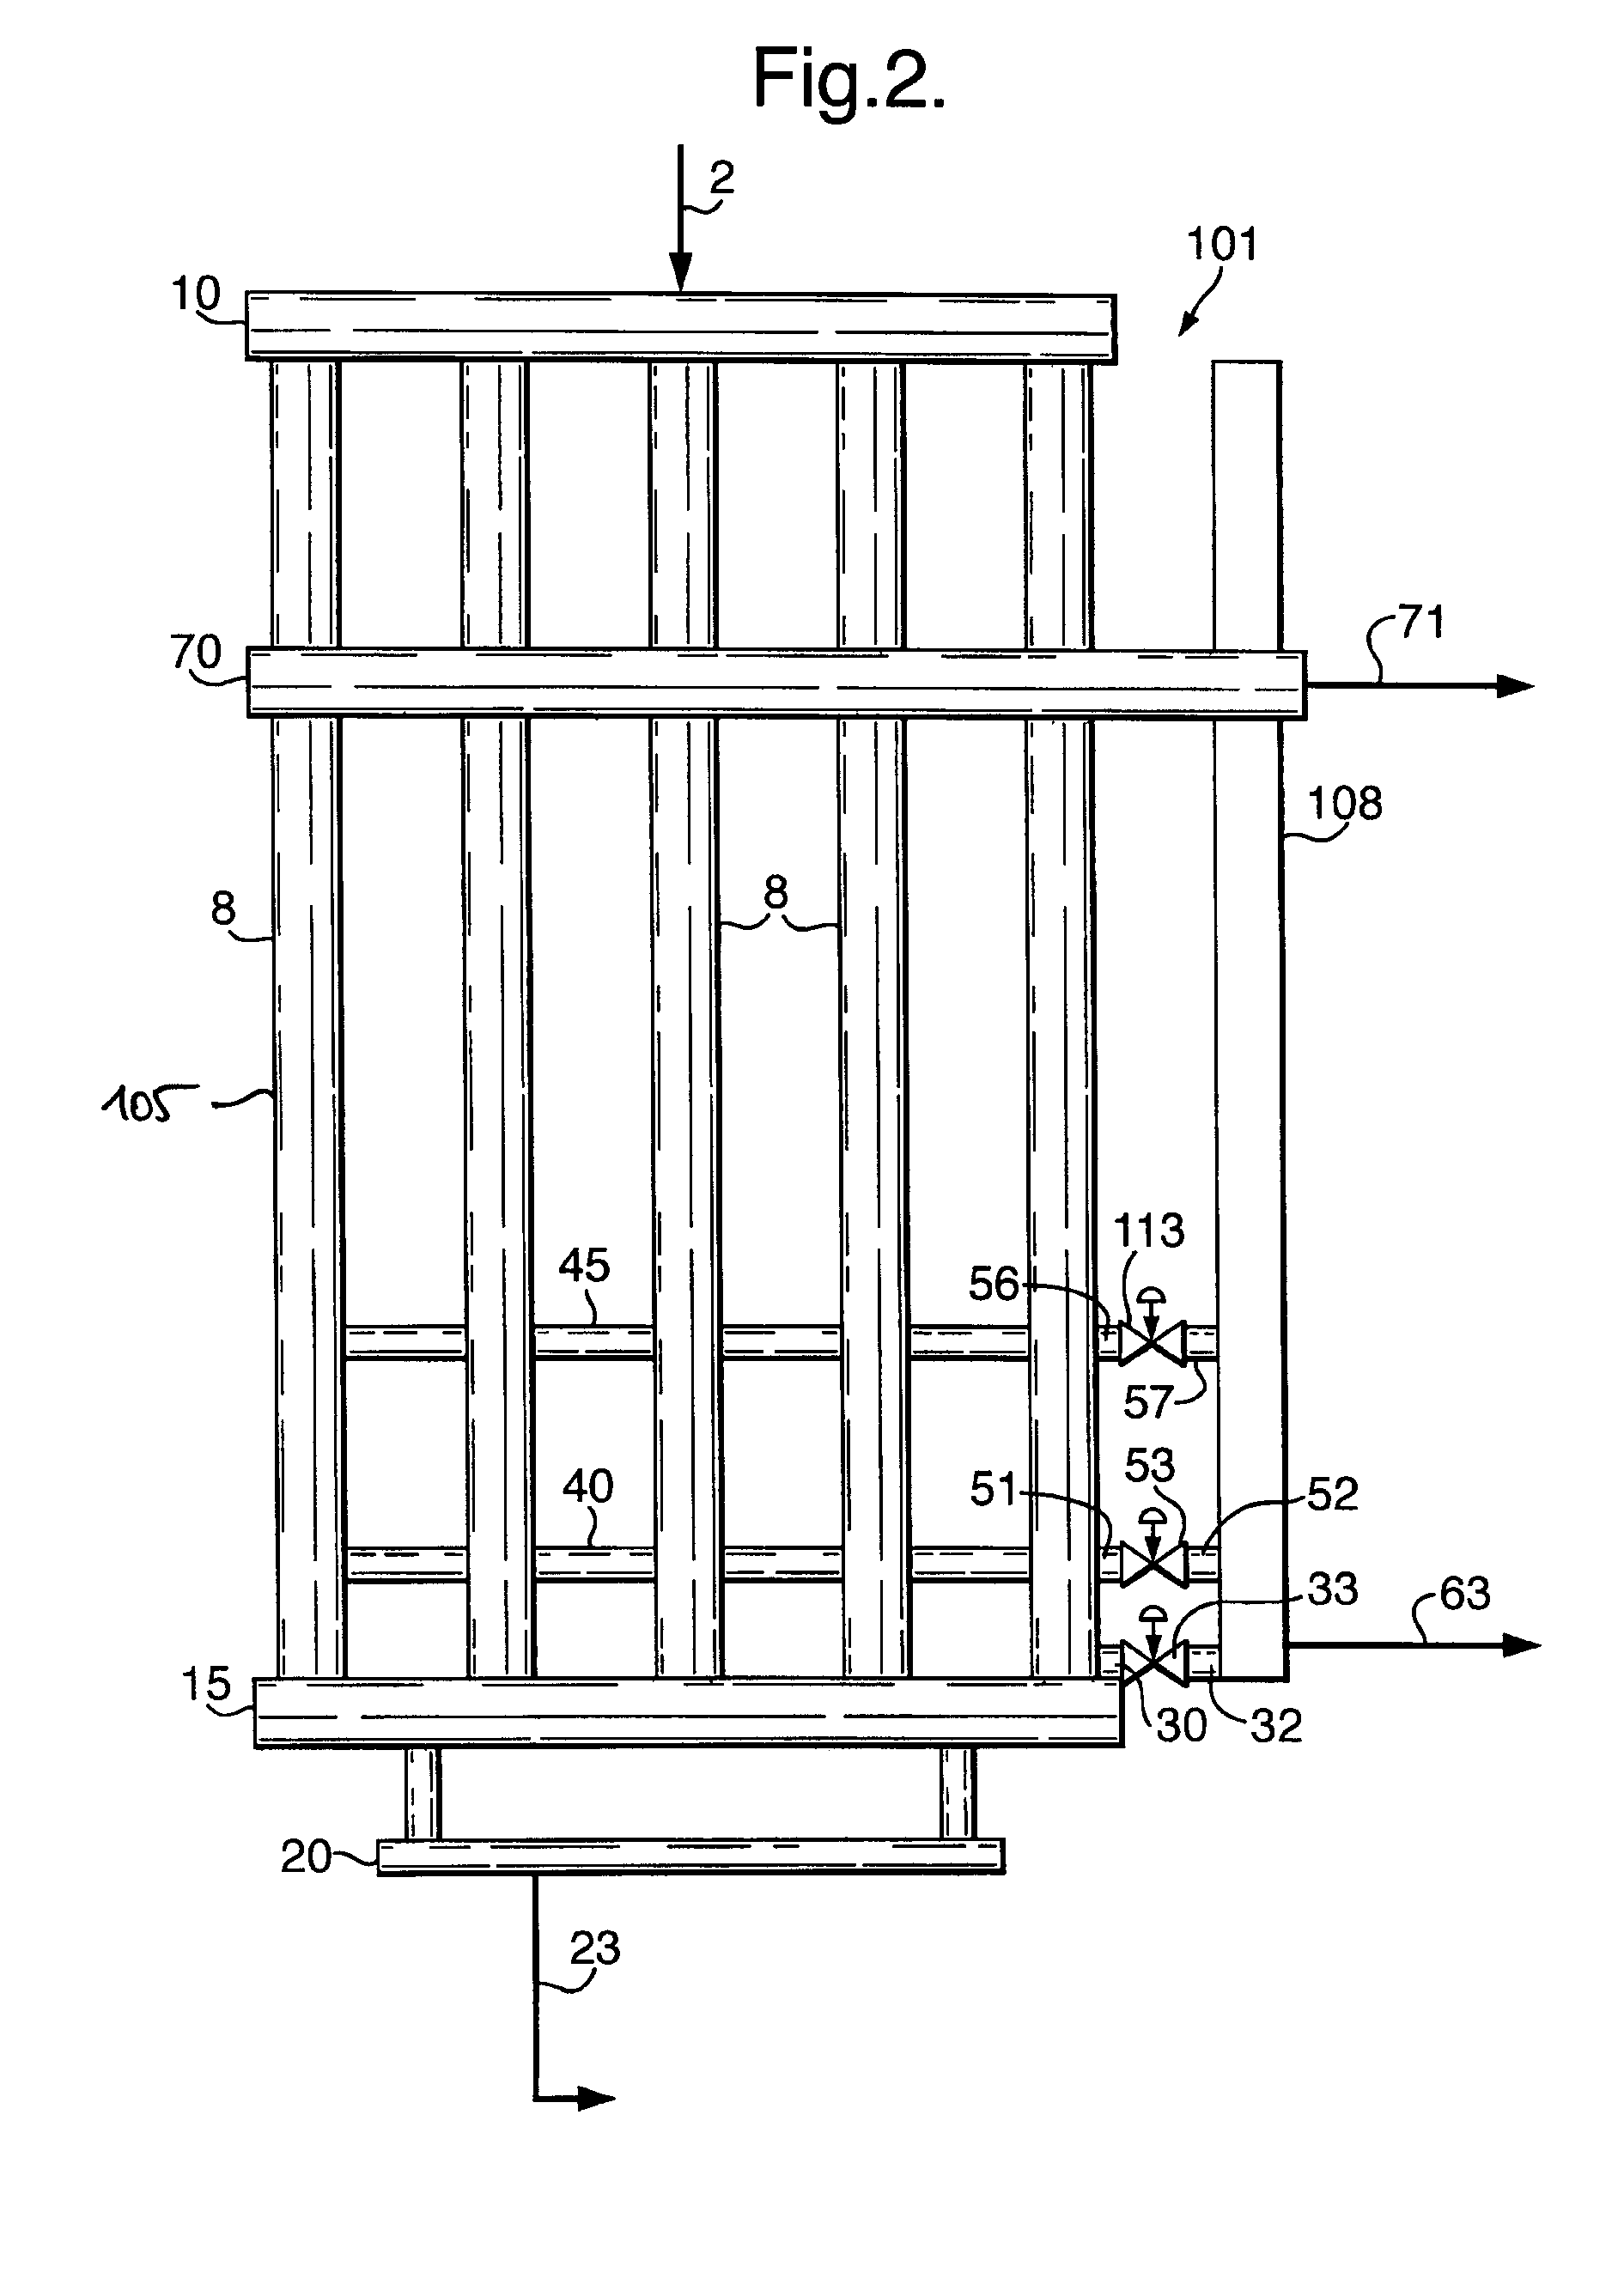 System and Method for Separating a Fluid Stream